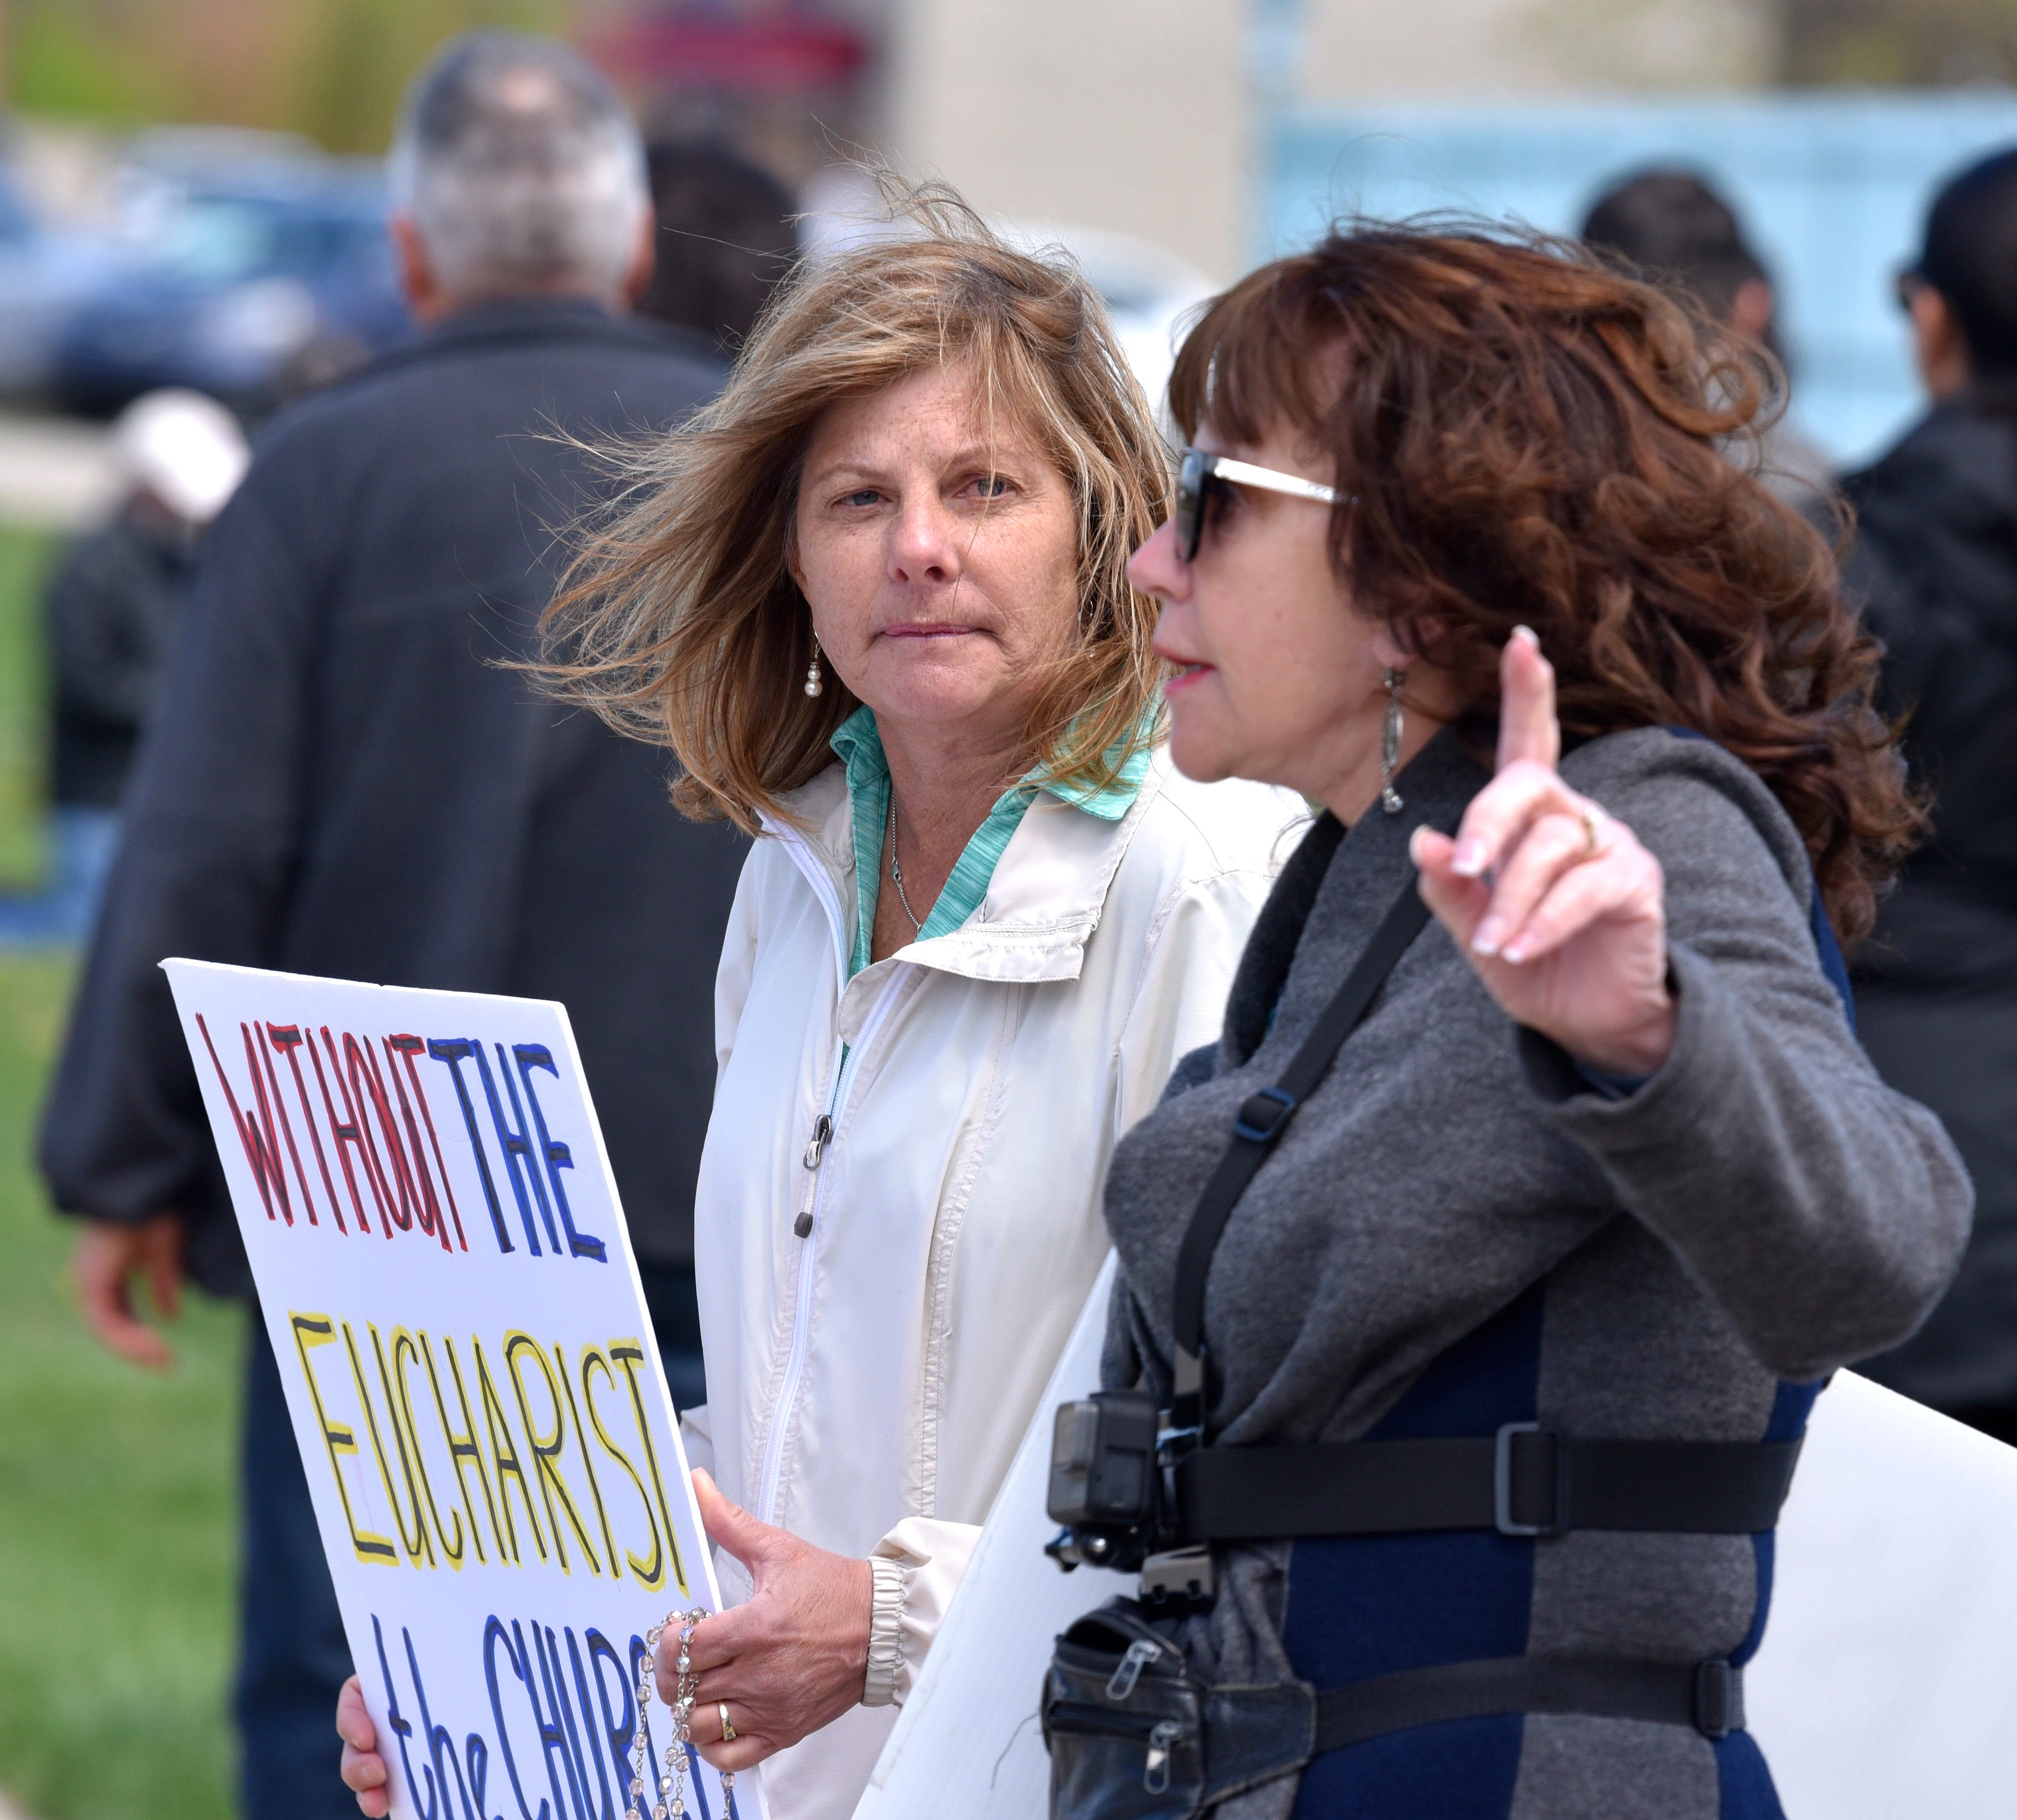 Co-organizers Patricia Stephanoff, left, and Lynn Mills, both of Livonia, talk during the action.